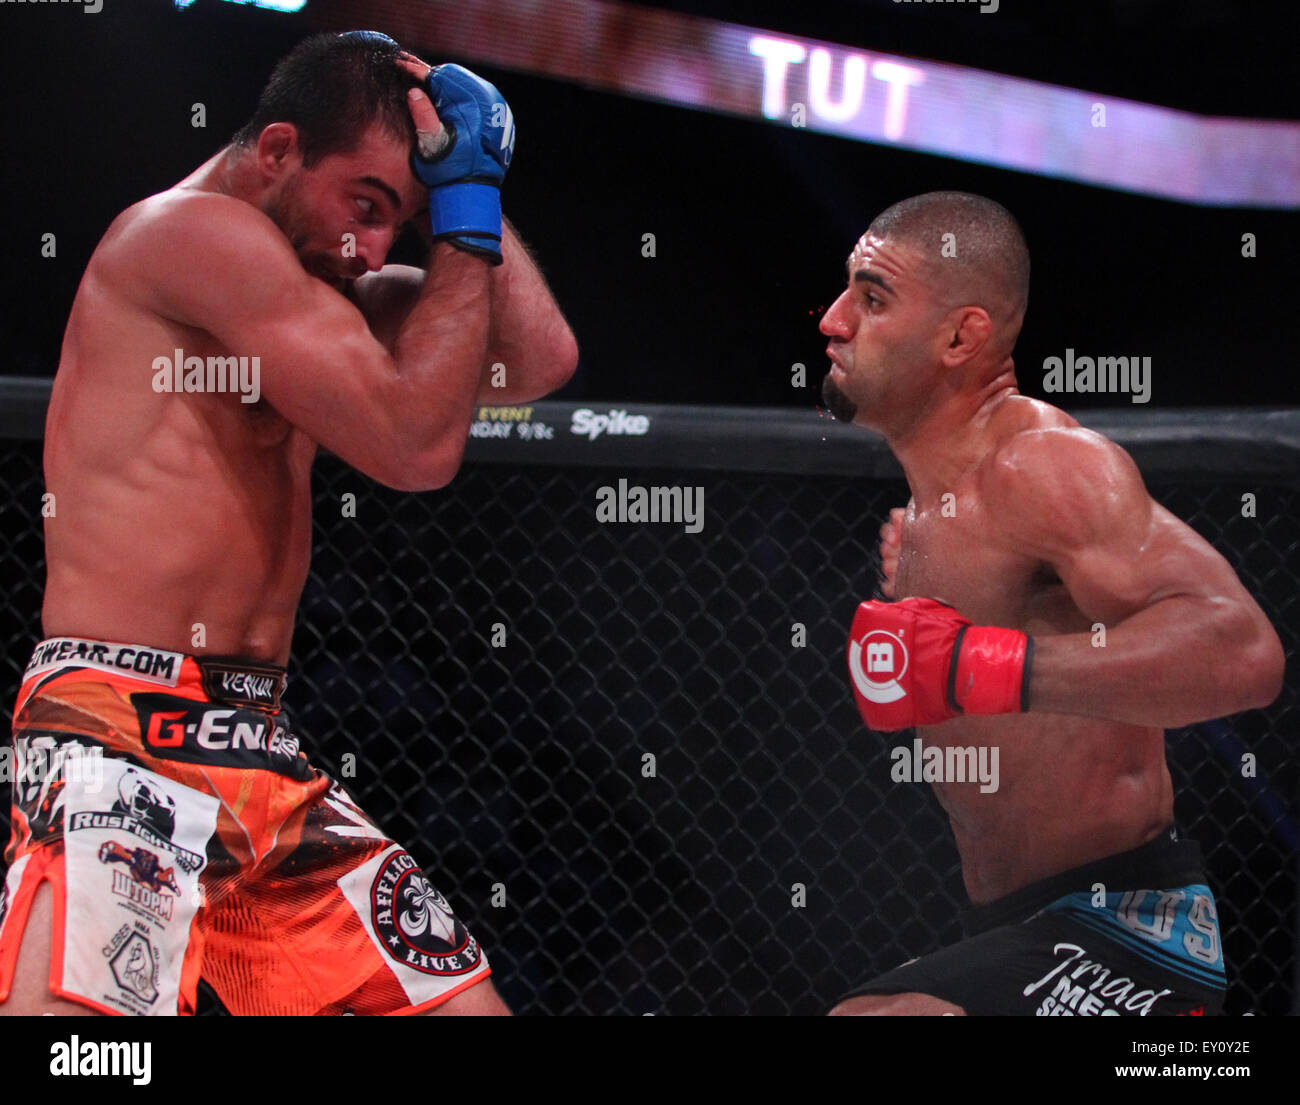 July 17, 2015; Uncasville, CT, USA; Douglas Lima (red tape) and Andrey Koreshkov (blue tape) in action during Bellator 140 welterweight title bout at Mohegan Sun Arena. Koreshkov wins the title defeating Lima by unanimous. Anthony Nesmith/Cal Sport Media Stock Photo